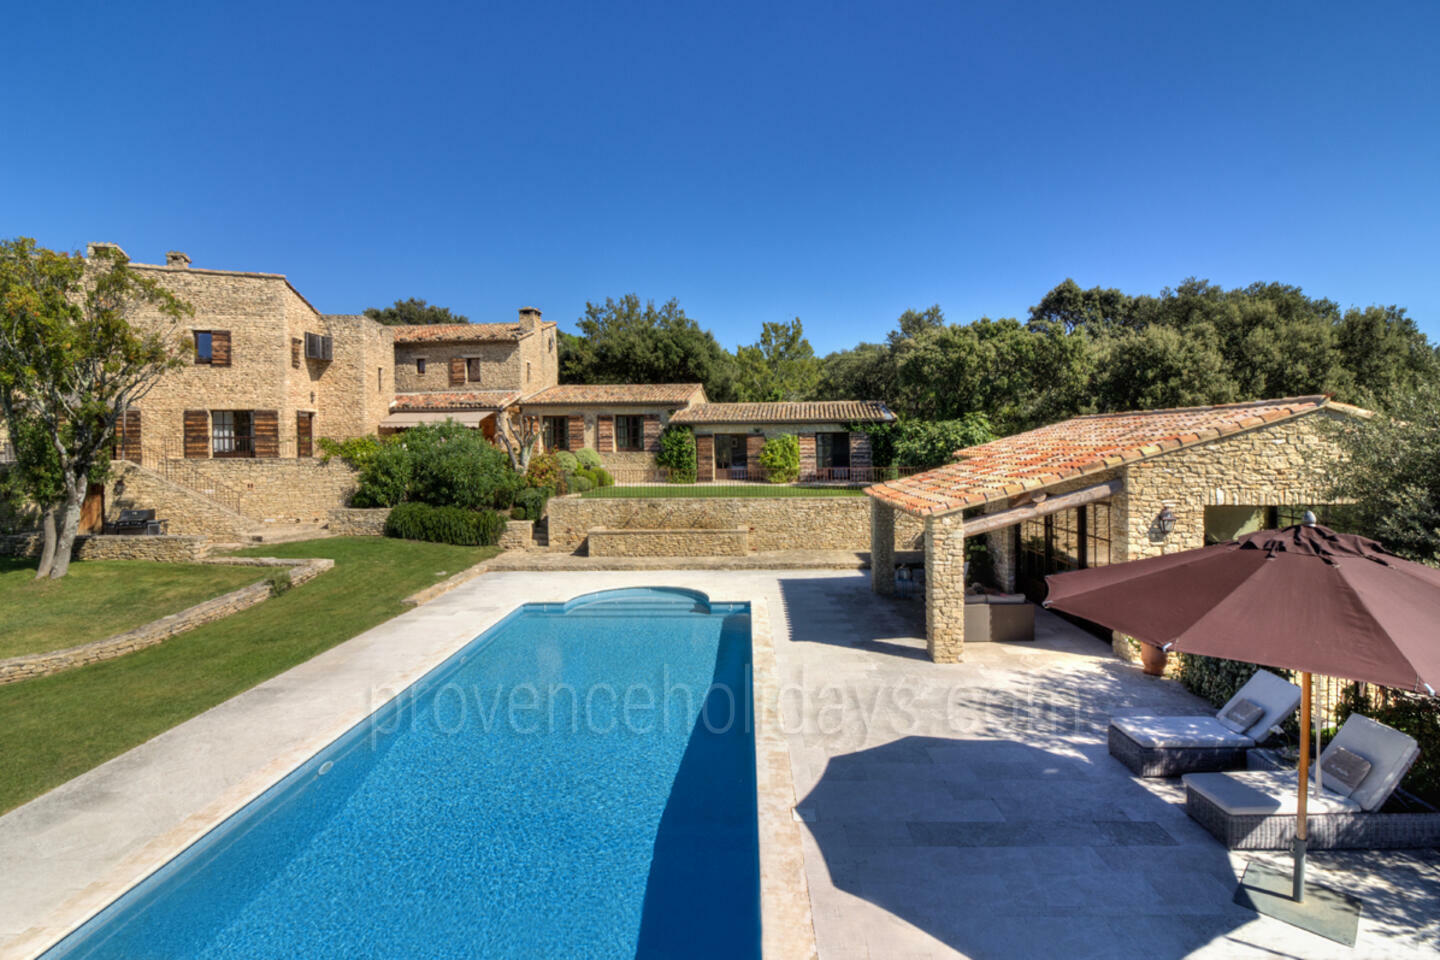 Fantastic Property with Luxury Pool House in the Luberon 1 - Mas des Fonts: Villa: Pool